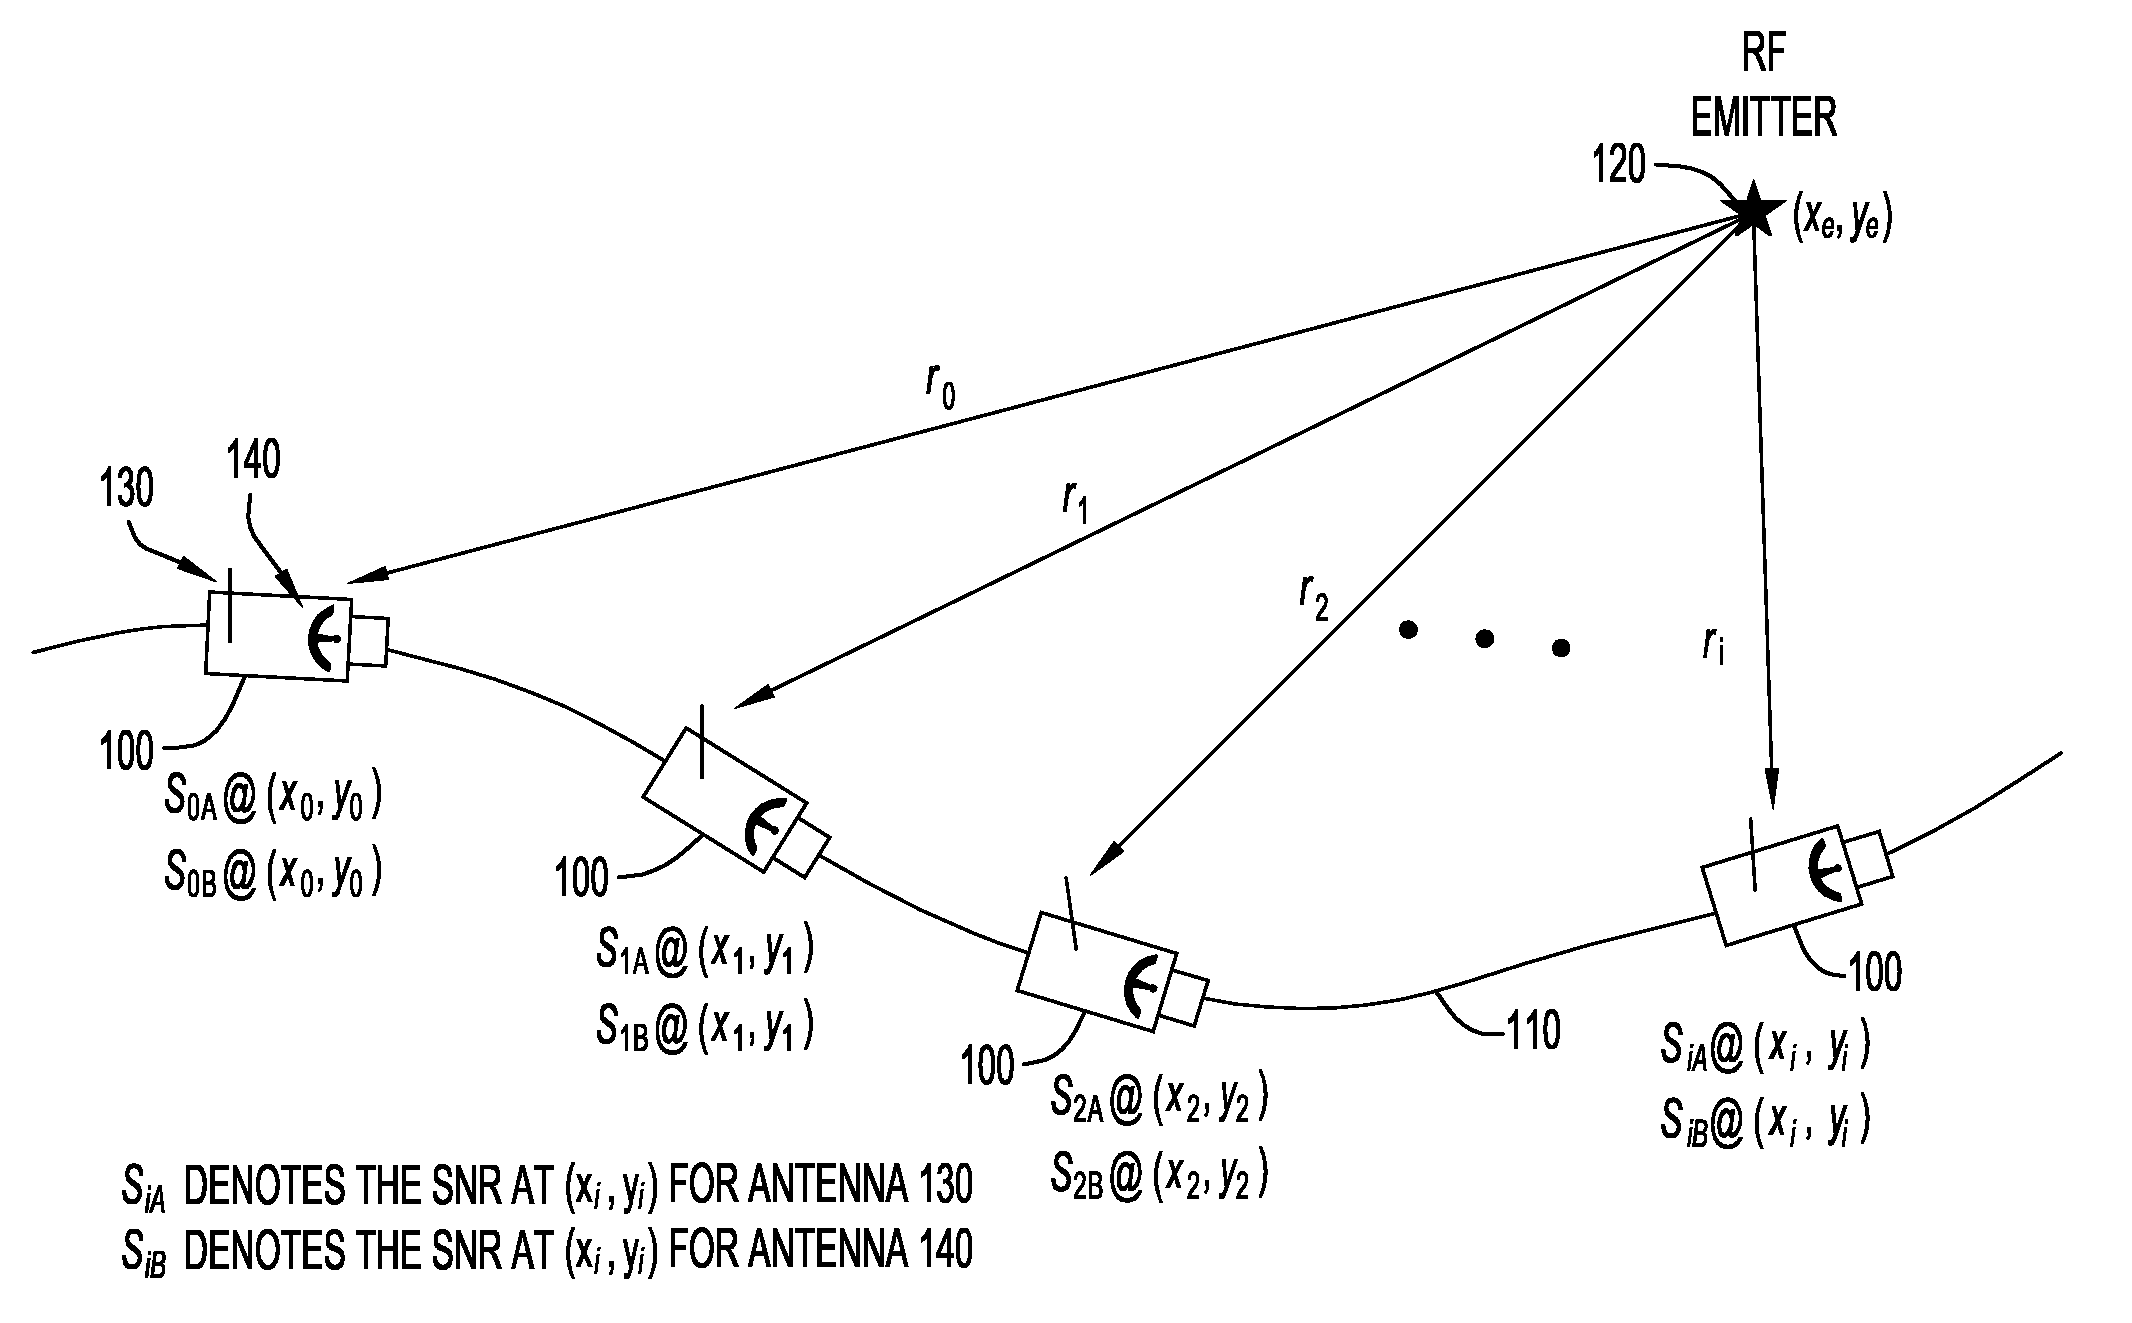 System and method for direction finding and geolocation of emitters based on line-of-bearing intersections